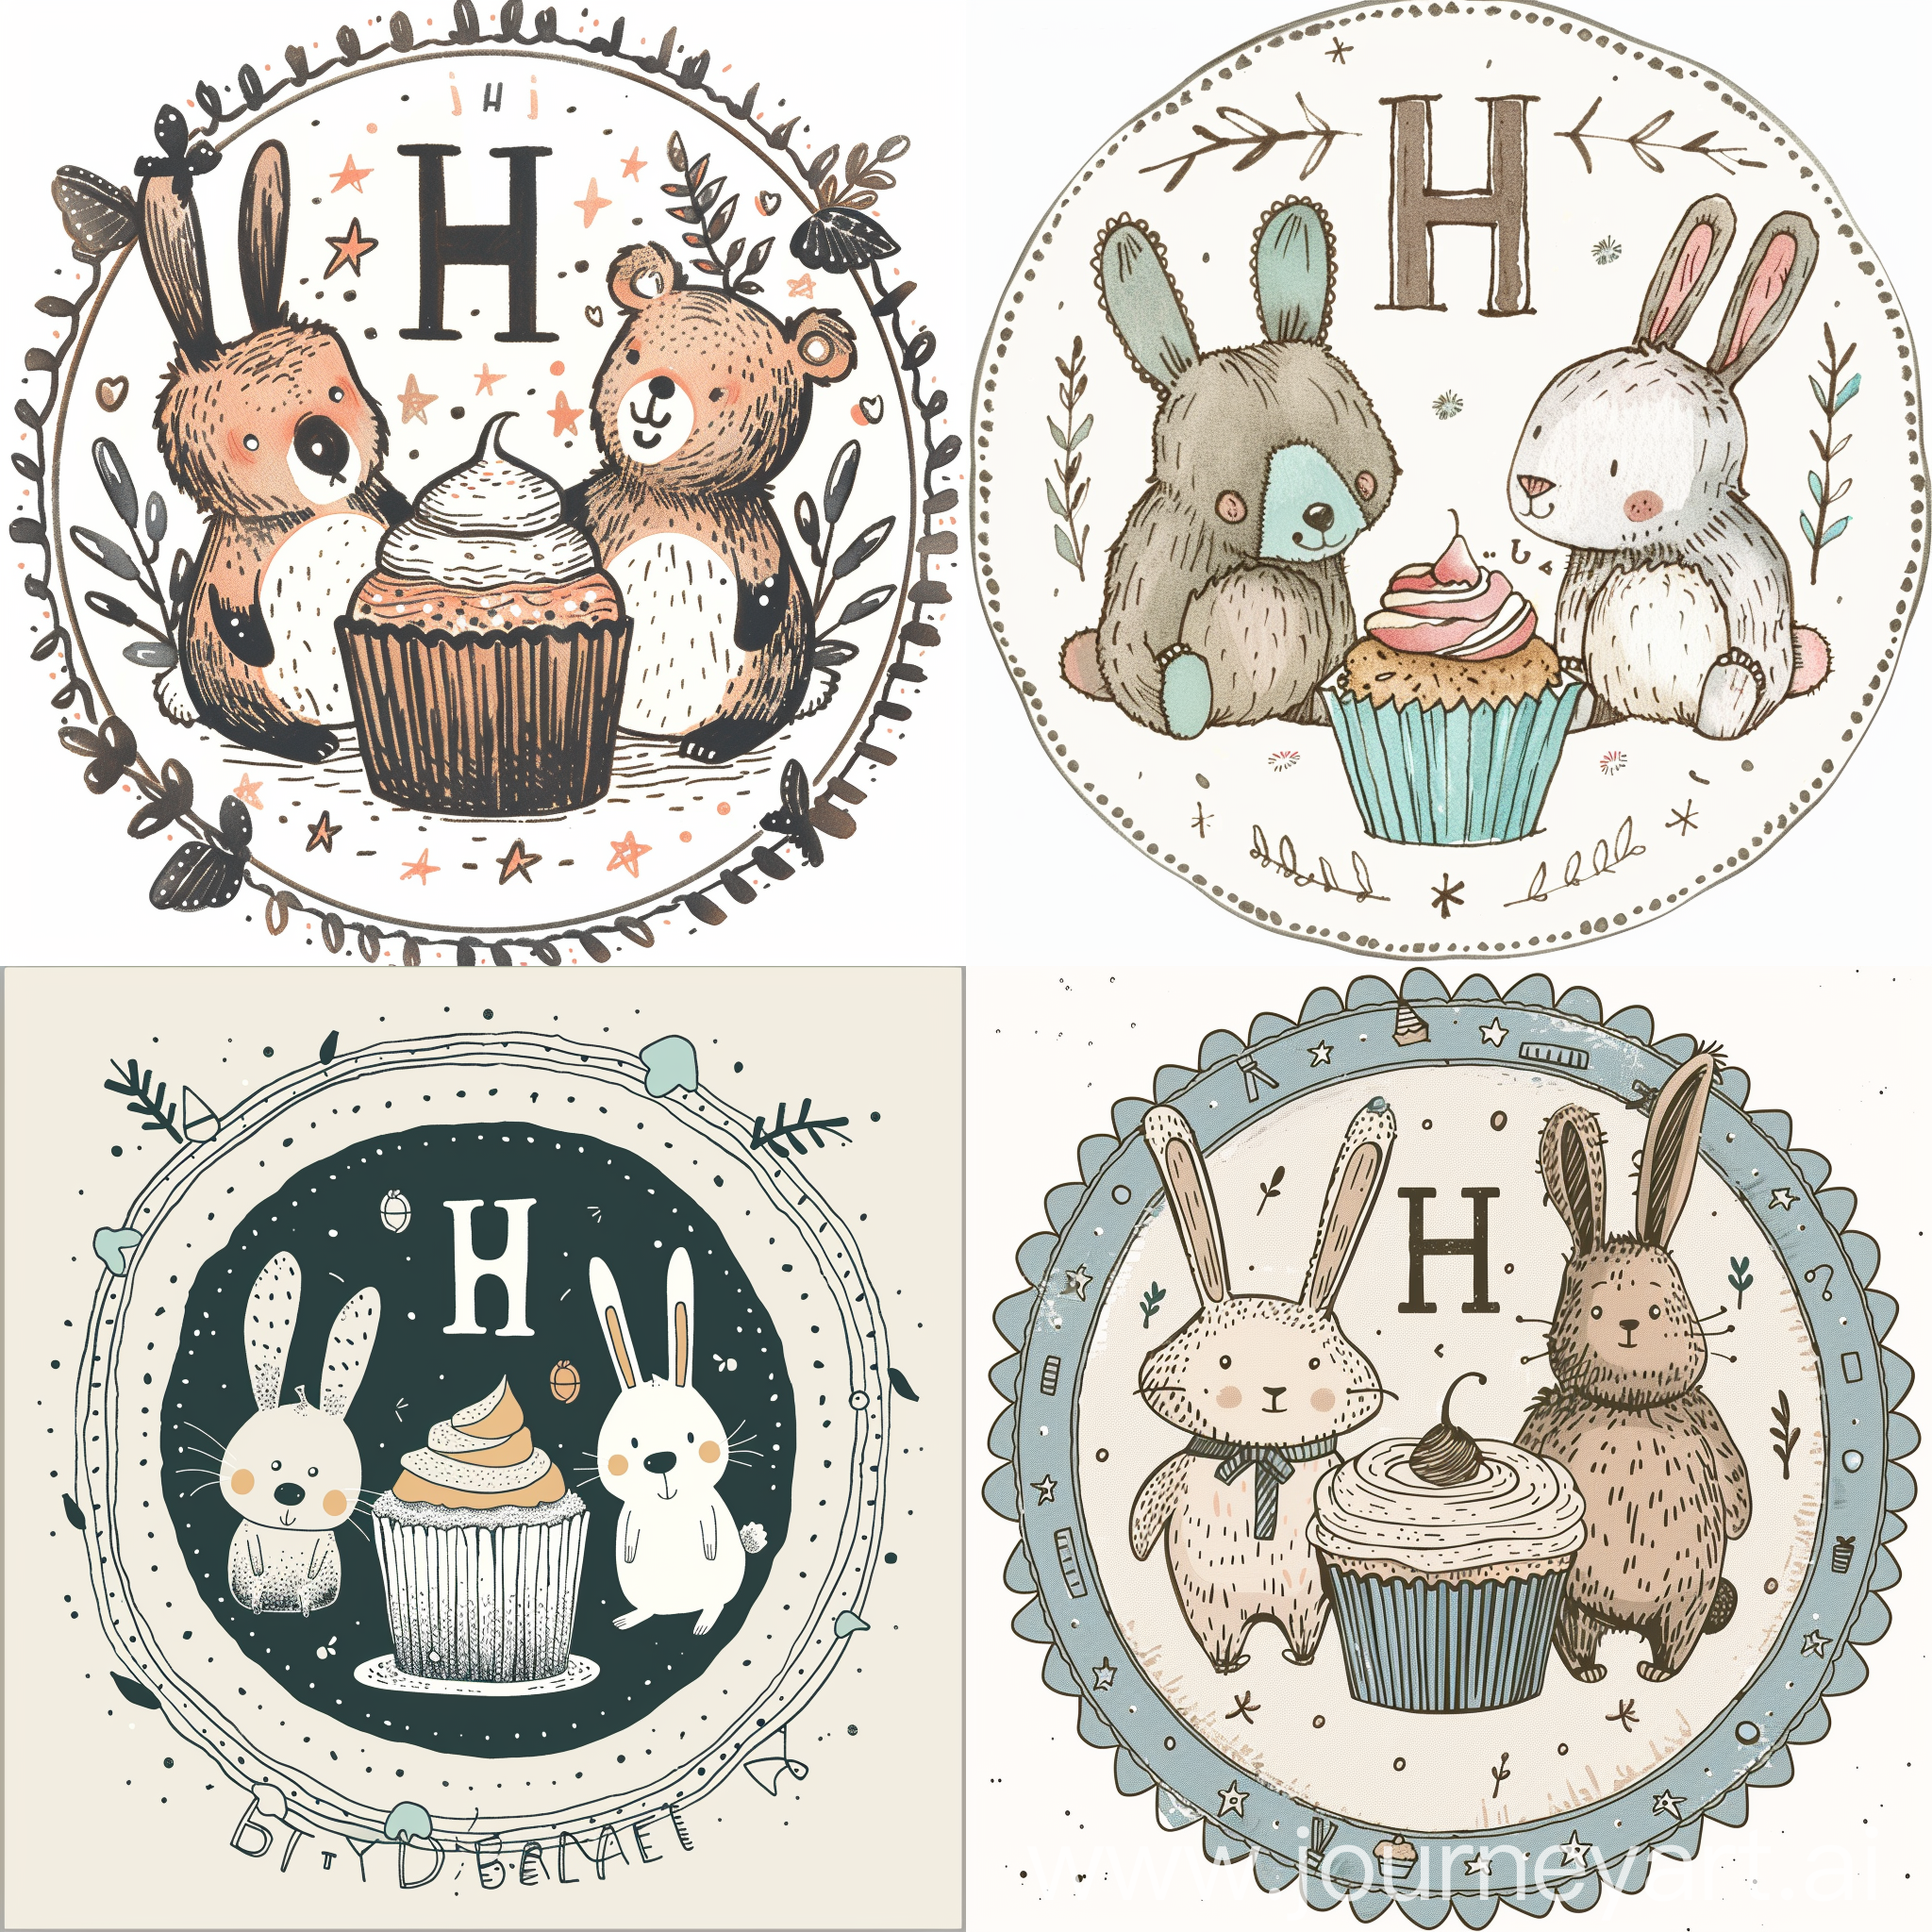 Incorporate a hand-drawn aesthetic featuring a cupcake, two playful and friendly characters resembling a bear and a rabbit, surrounded by a circular border with the text H